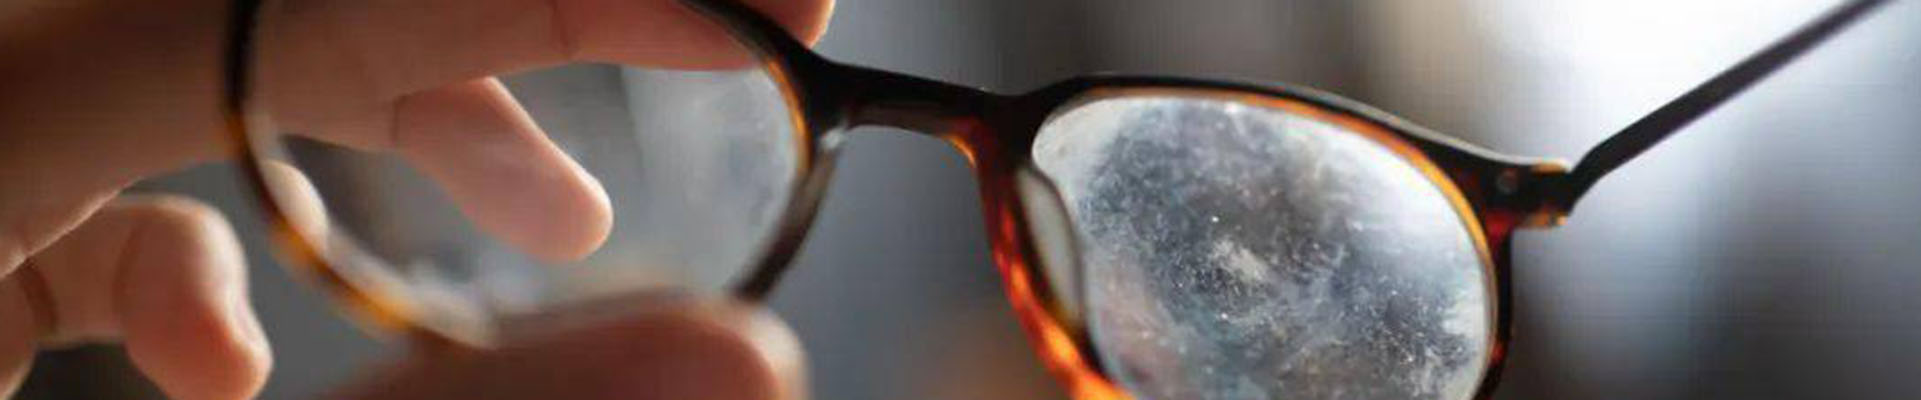 How to remove scratches from eyeglasses plastic